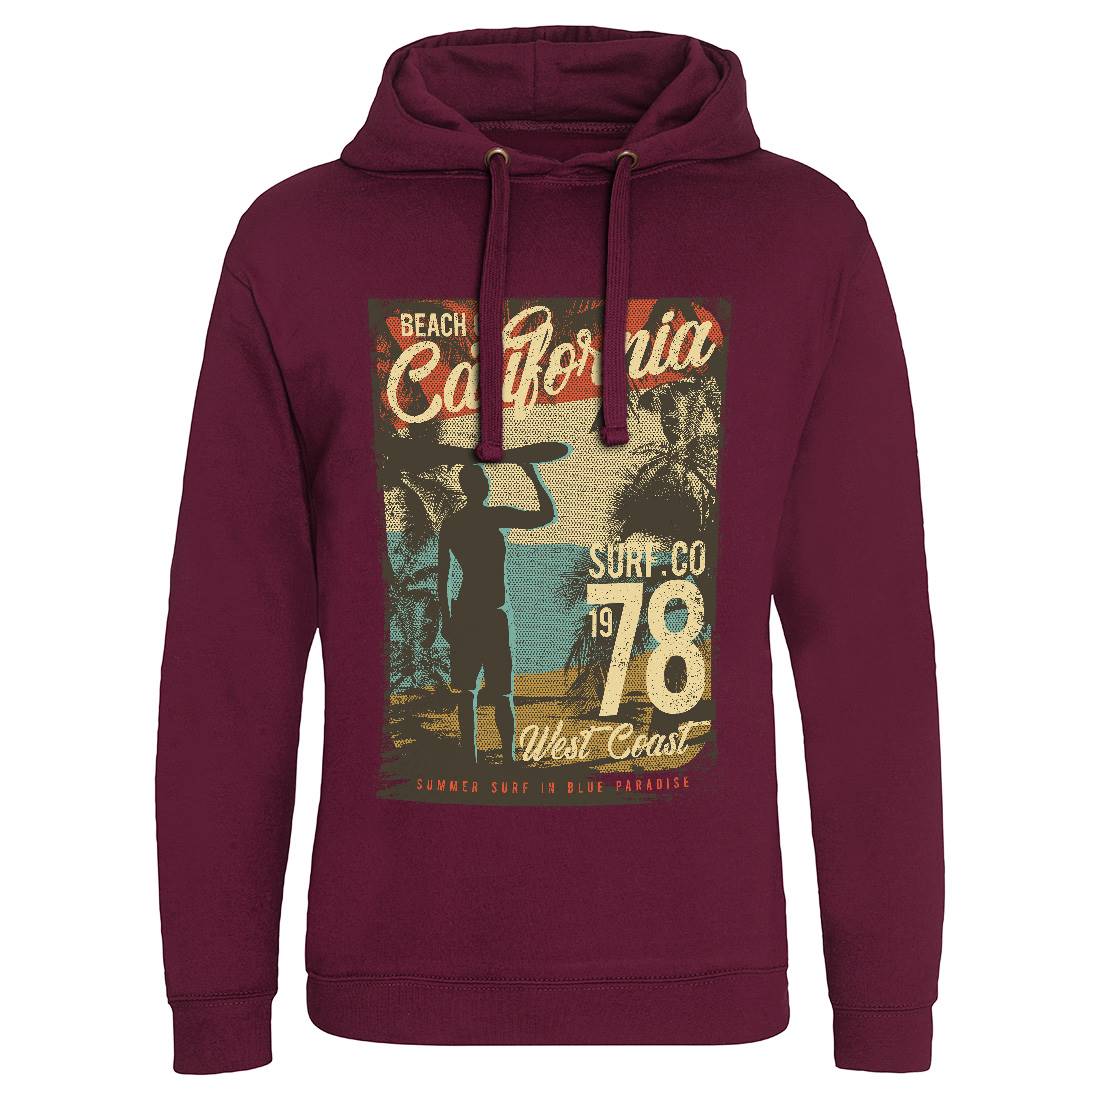 Beach Of California Mens Hoodie Without Pocket Holiday D009